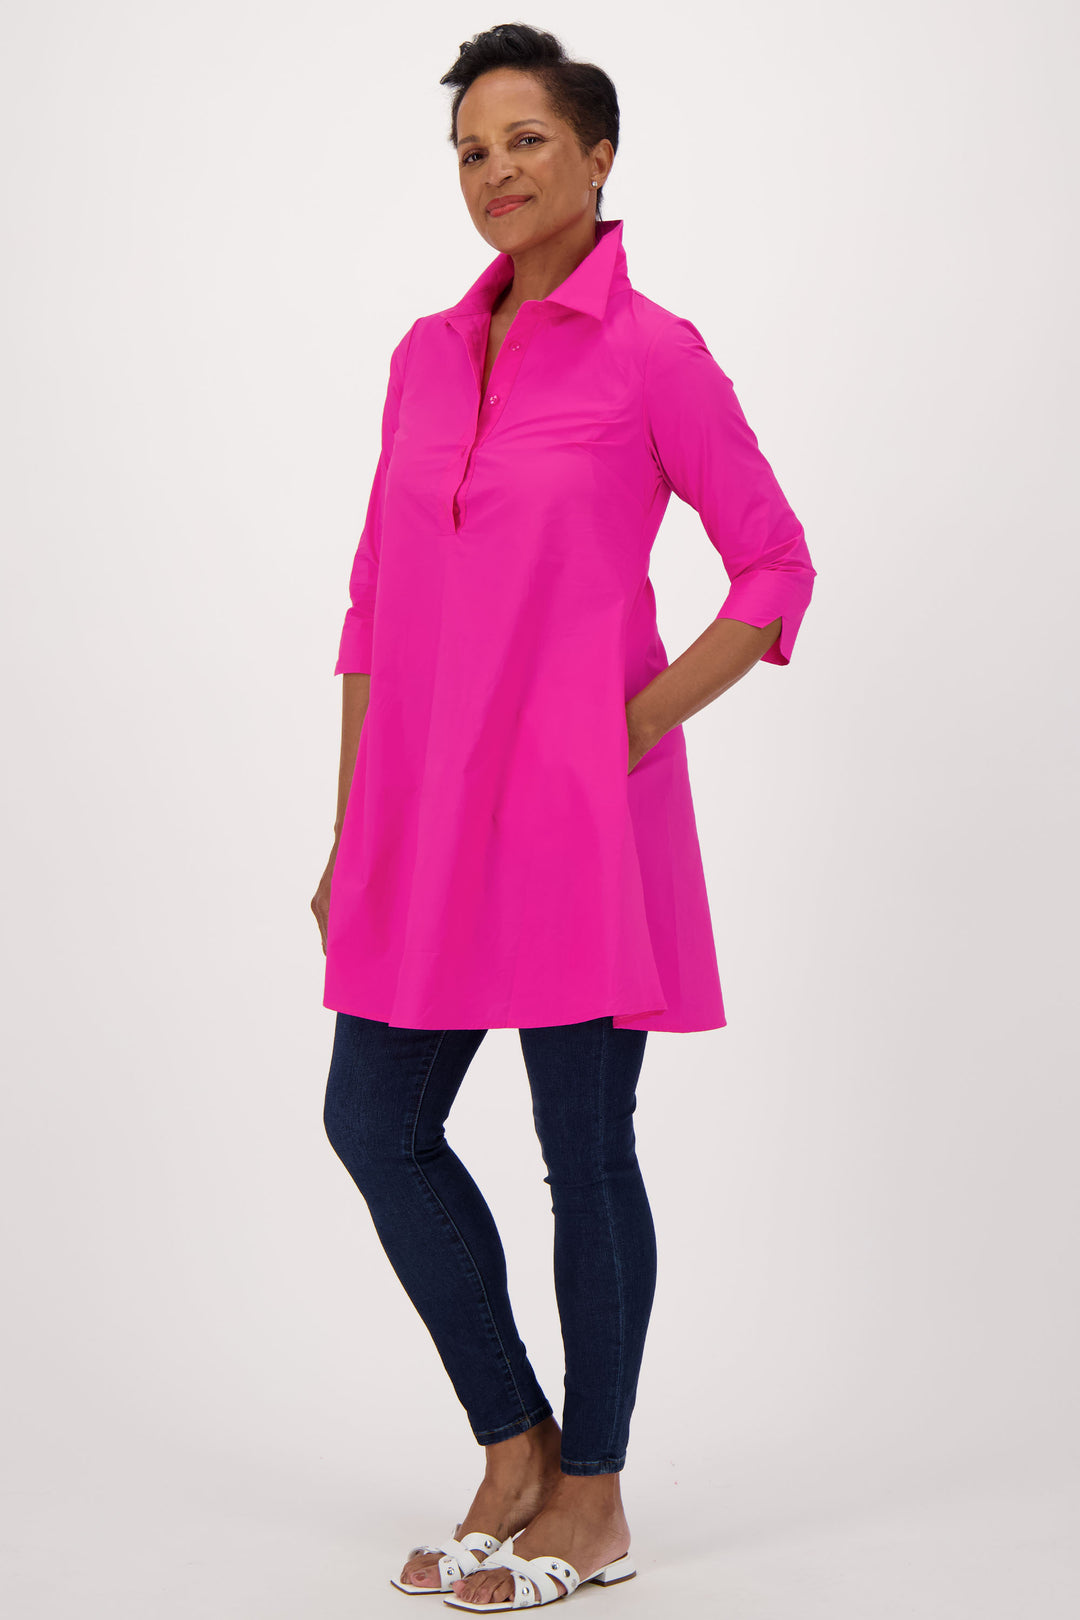 Spanner Summer 2024 This elegant dress features a classic collar and quarter front buttons, perfect for a sophisticated and exclusive look. The 3/4 length sleeves and great flow make it a versatile piece, ideal for pairing with slim fit jeans or wearing on its own as a short dress